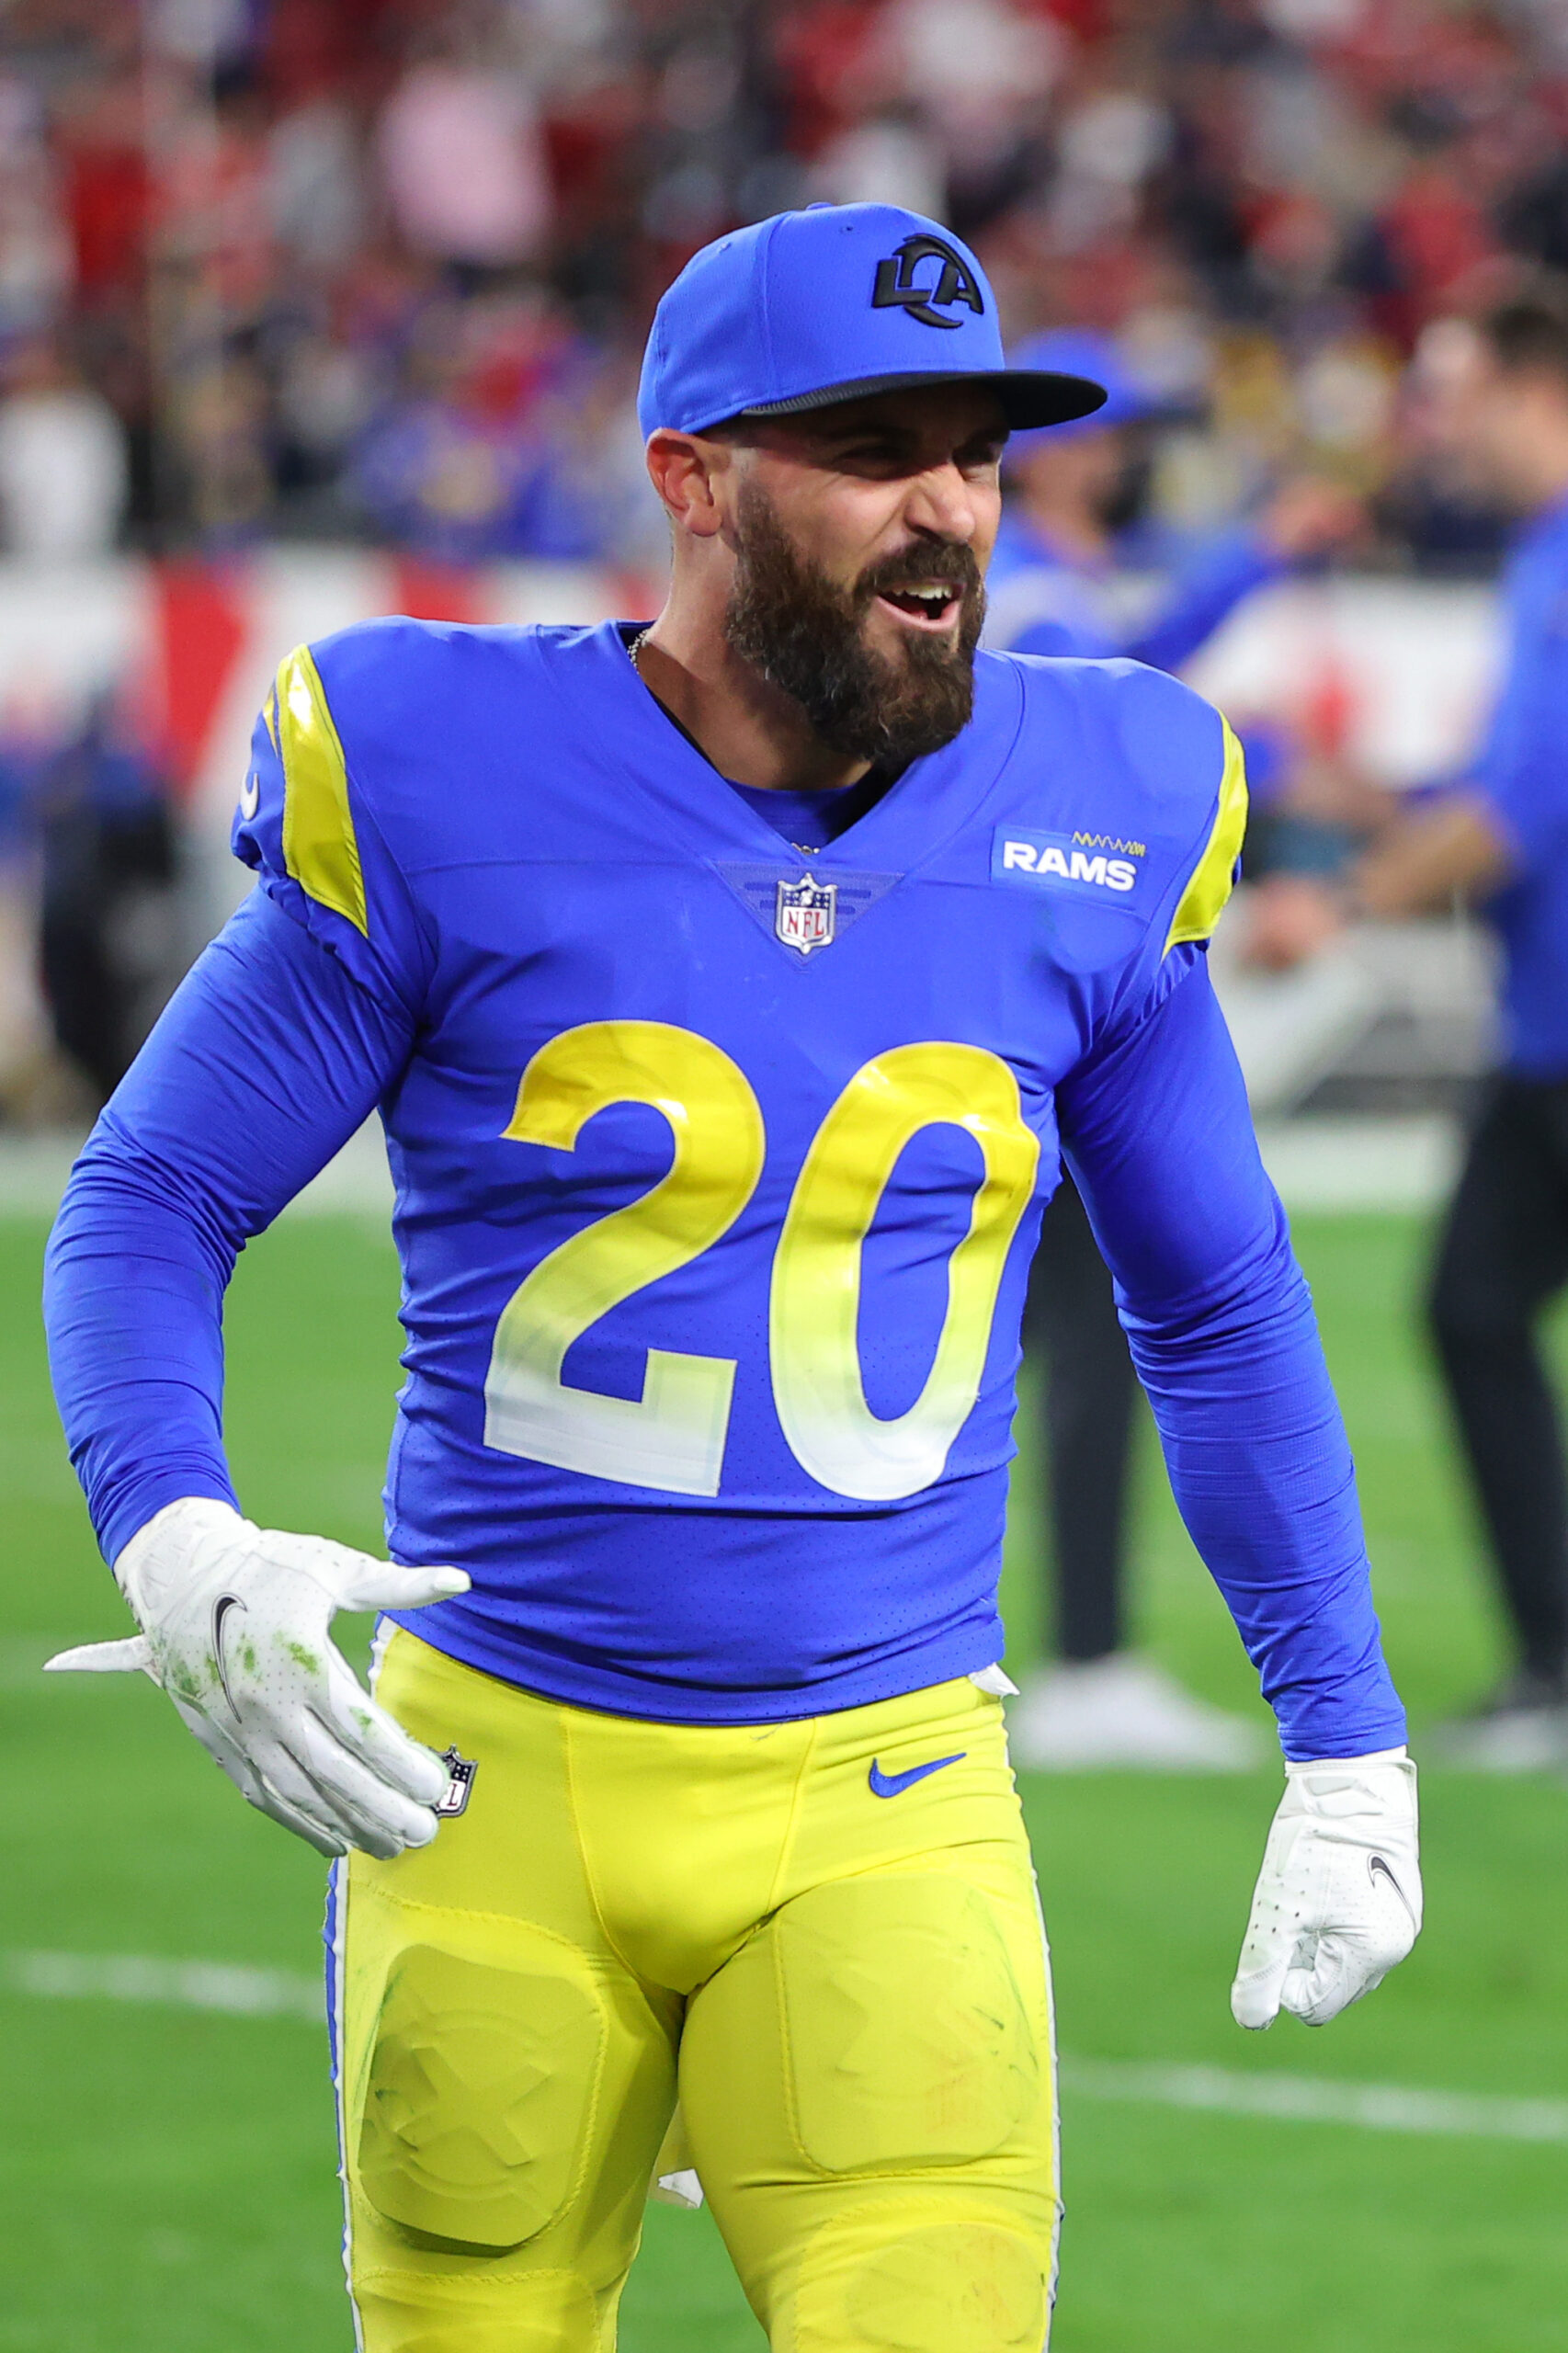 Former NFL Player Eric Weddle Stunning Wife Chanel Weddle And Kids-Meet The Family